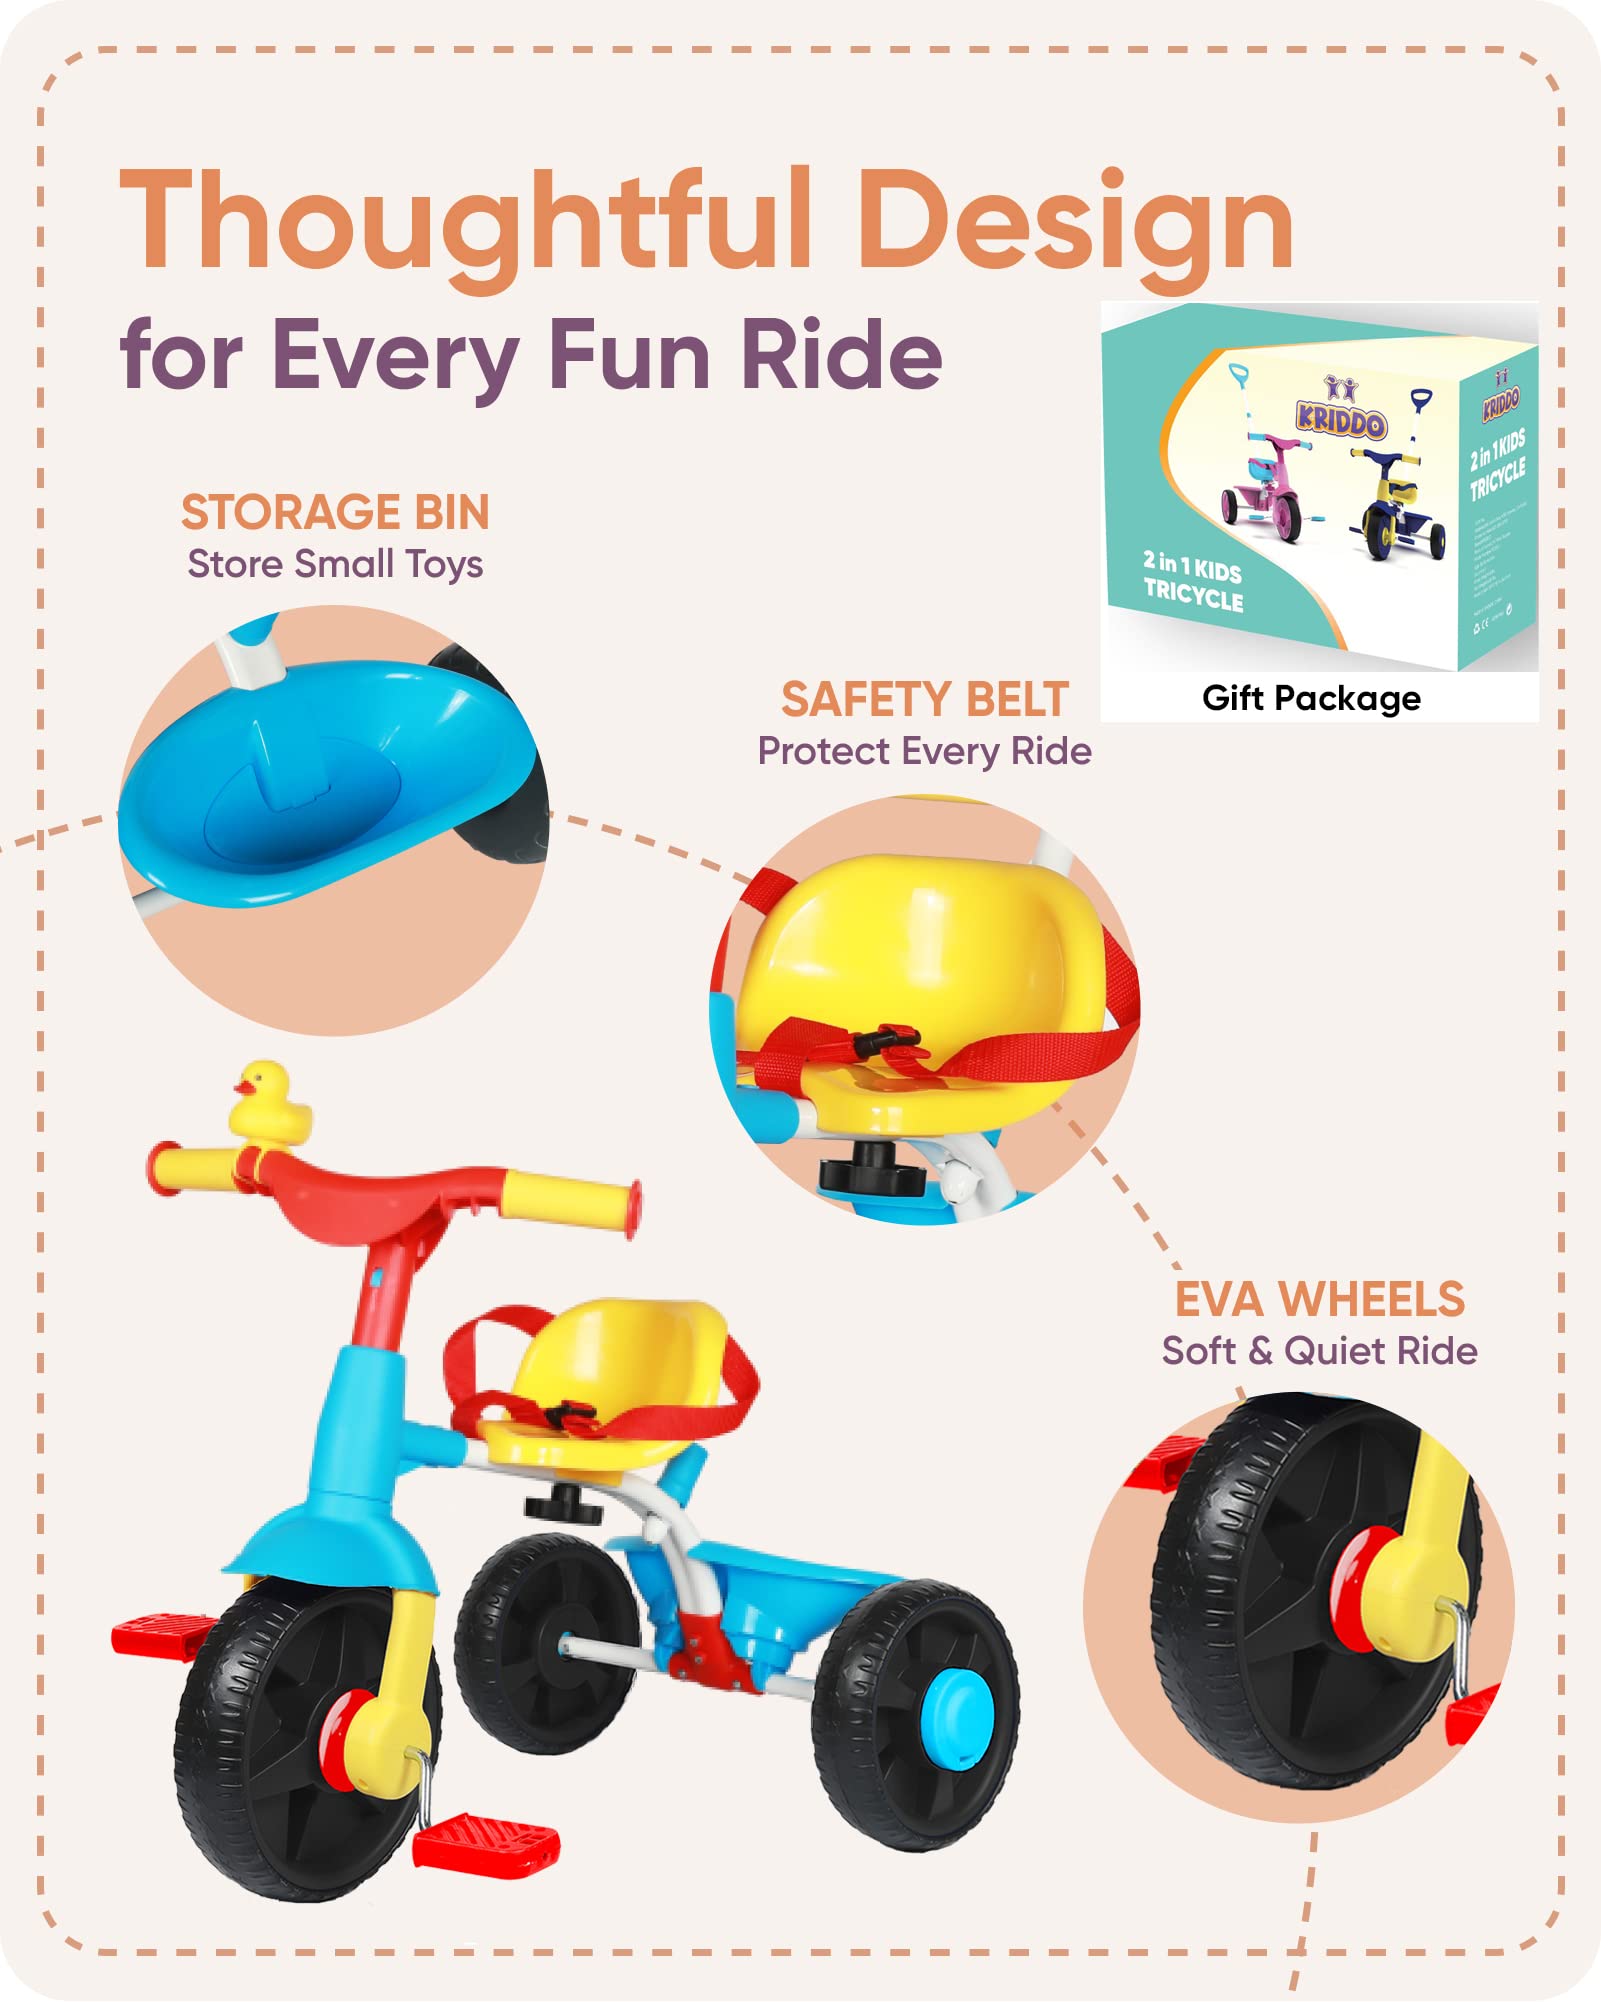 KRIDDO 2 in 1 Kids Tricycles Age 18 Month to 3 Years, Gift Toddler Trikes for Toddlers with Push Handle and Duck Bell, Classic